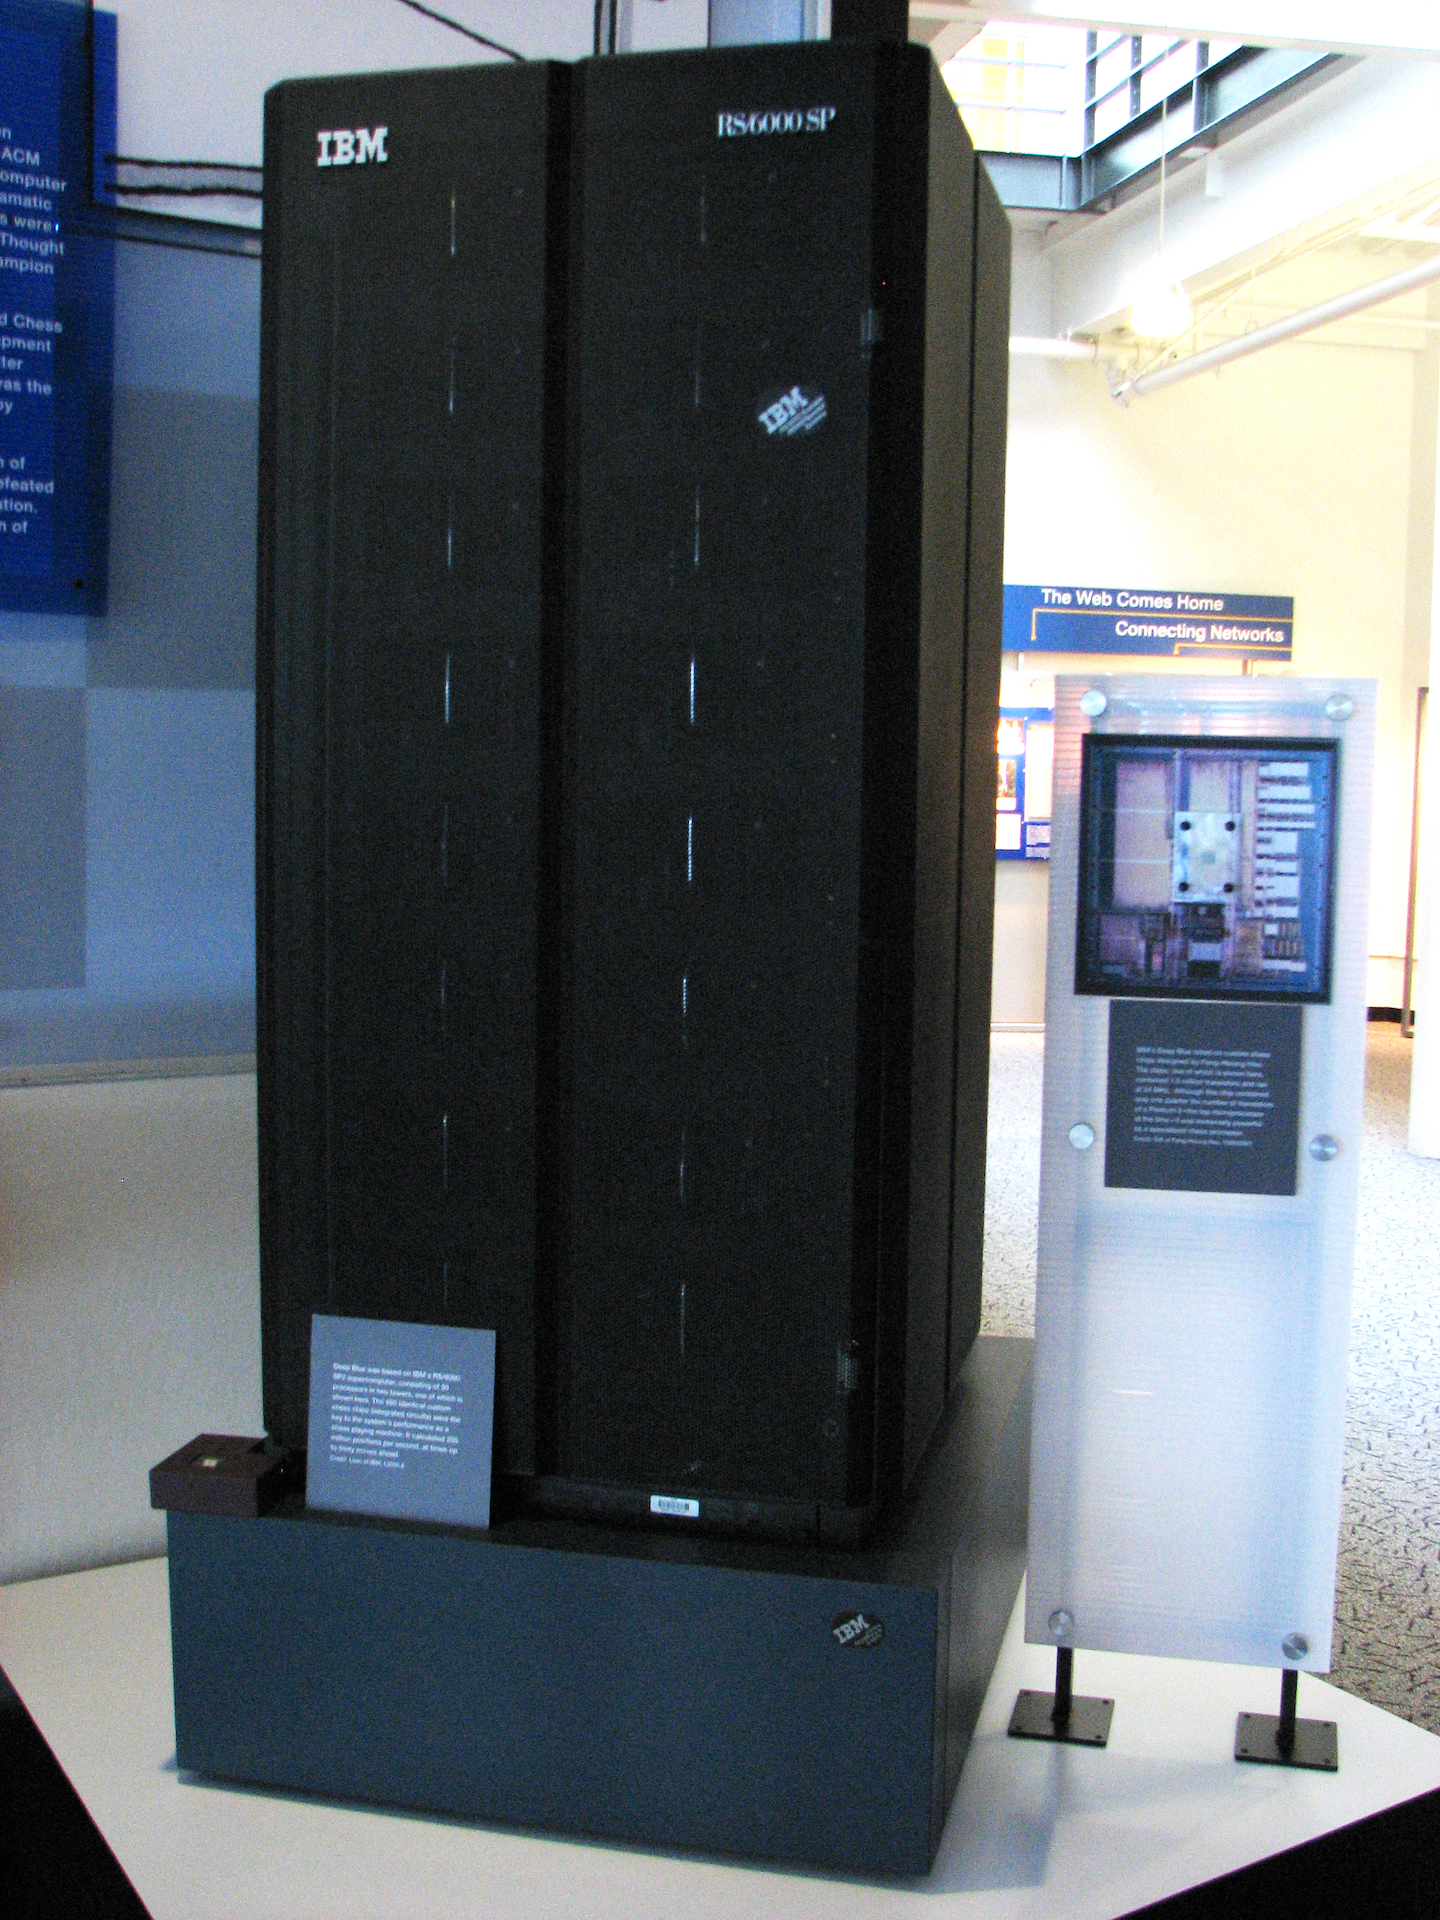 a black, rectangular object with a white "IBM" label in the corner sits atop a stand beside a plaque describing it